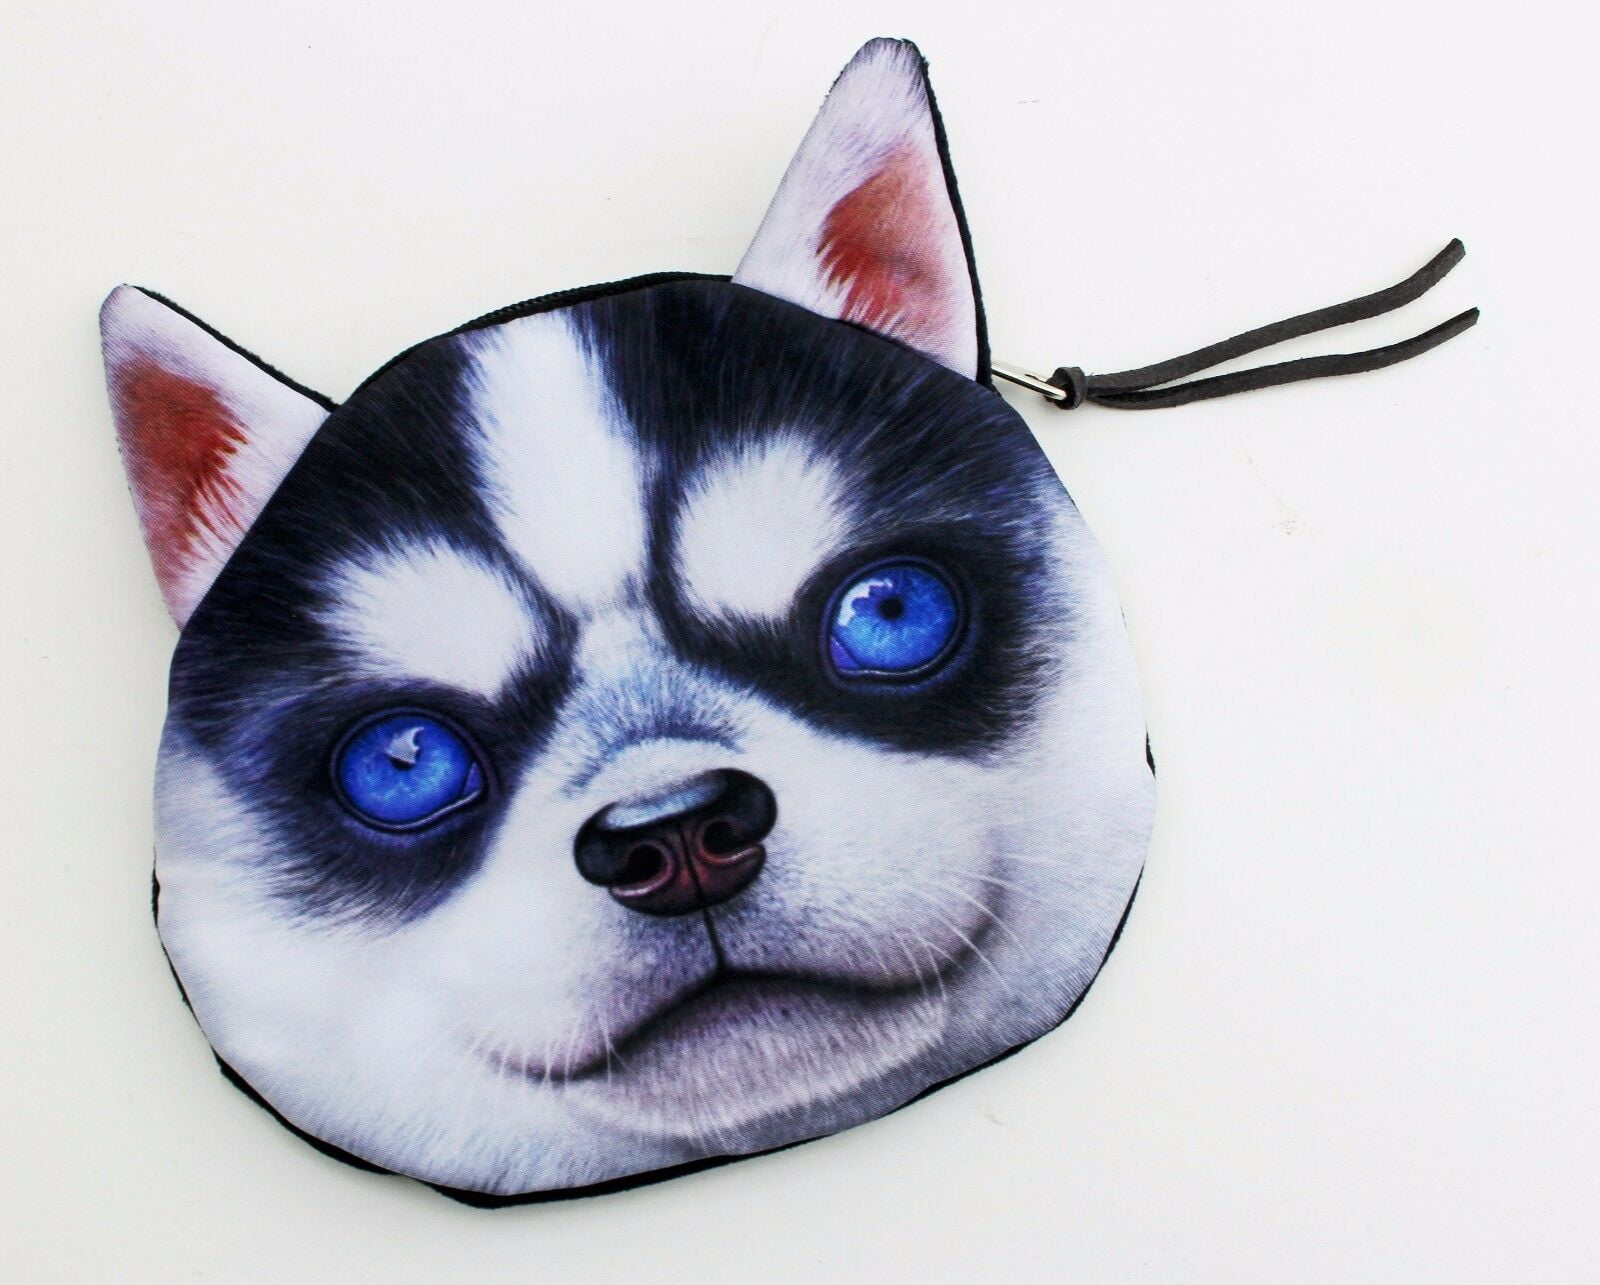 Rh Studio Coin Purse Clasp Closure Dogs Face Cute Nose Ears Print Wallet Exquisite Coin Pouch Girls Women Clutch Handbag Exquisite Gift